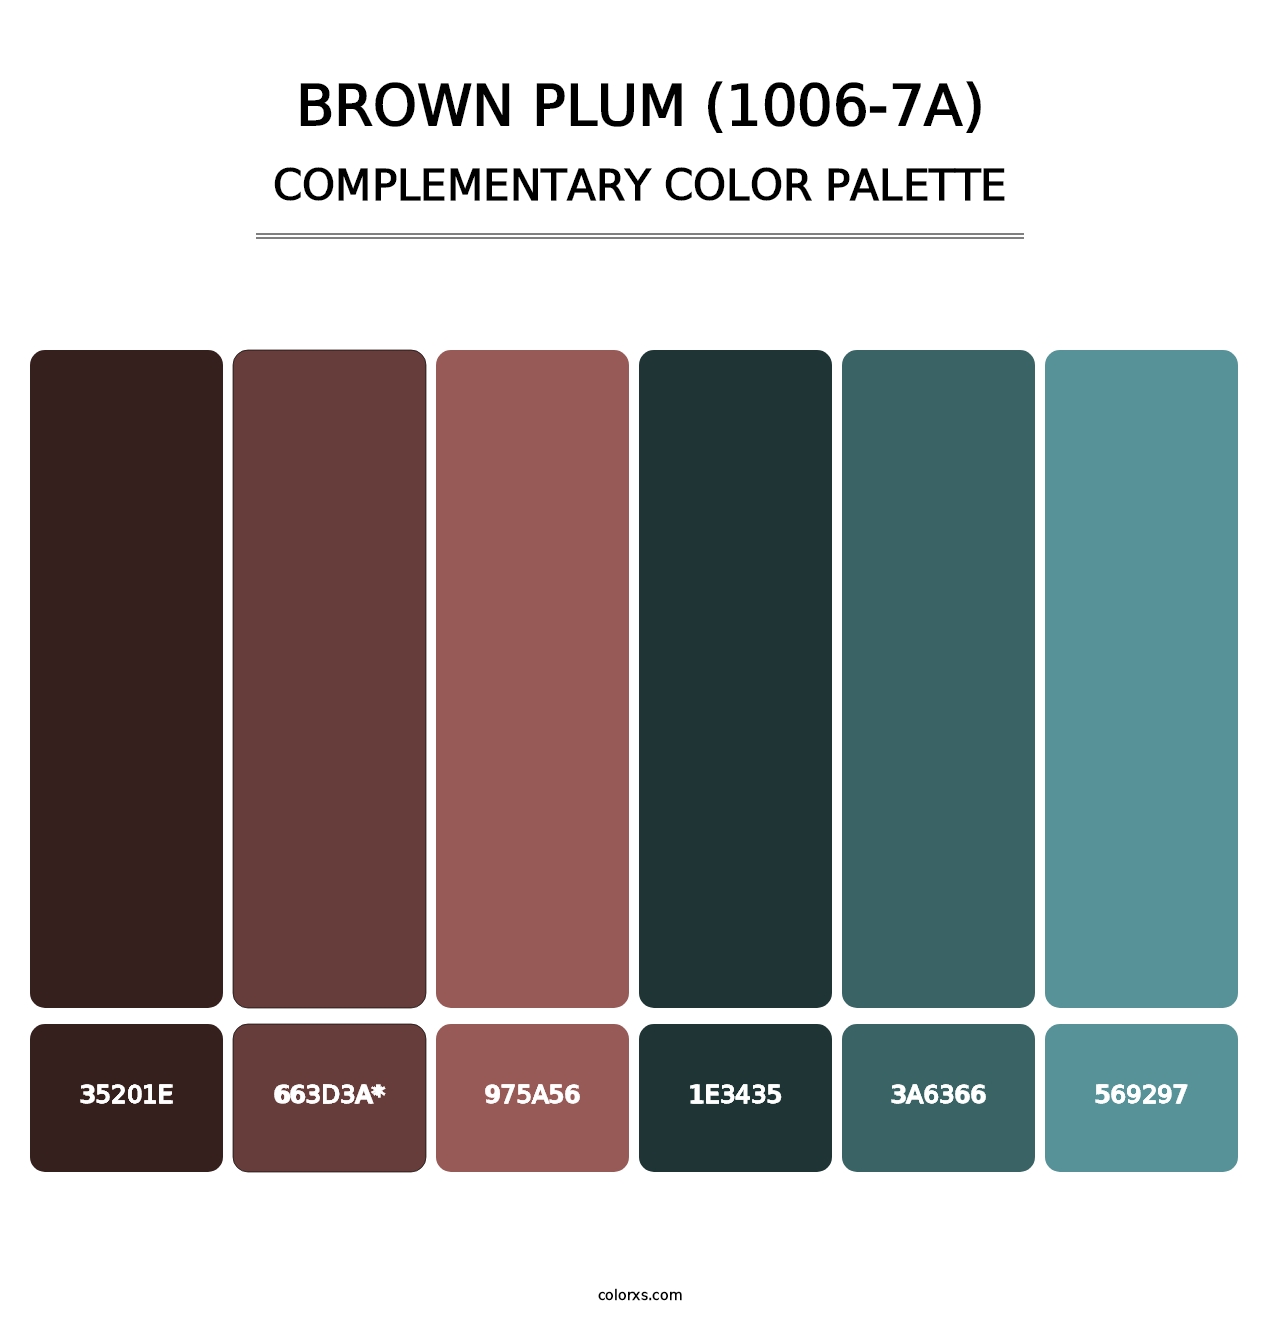 Brown Plum (1006-7A) - Complementary Color Palette